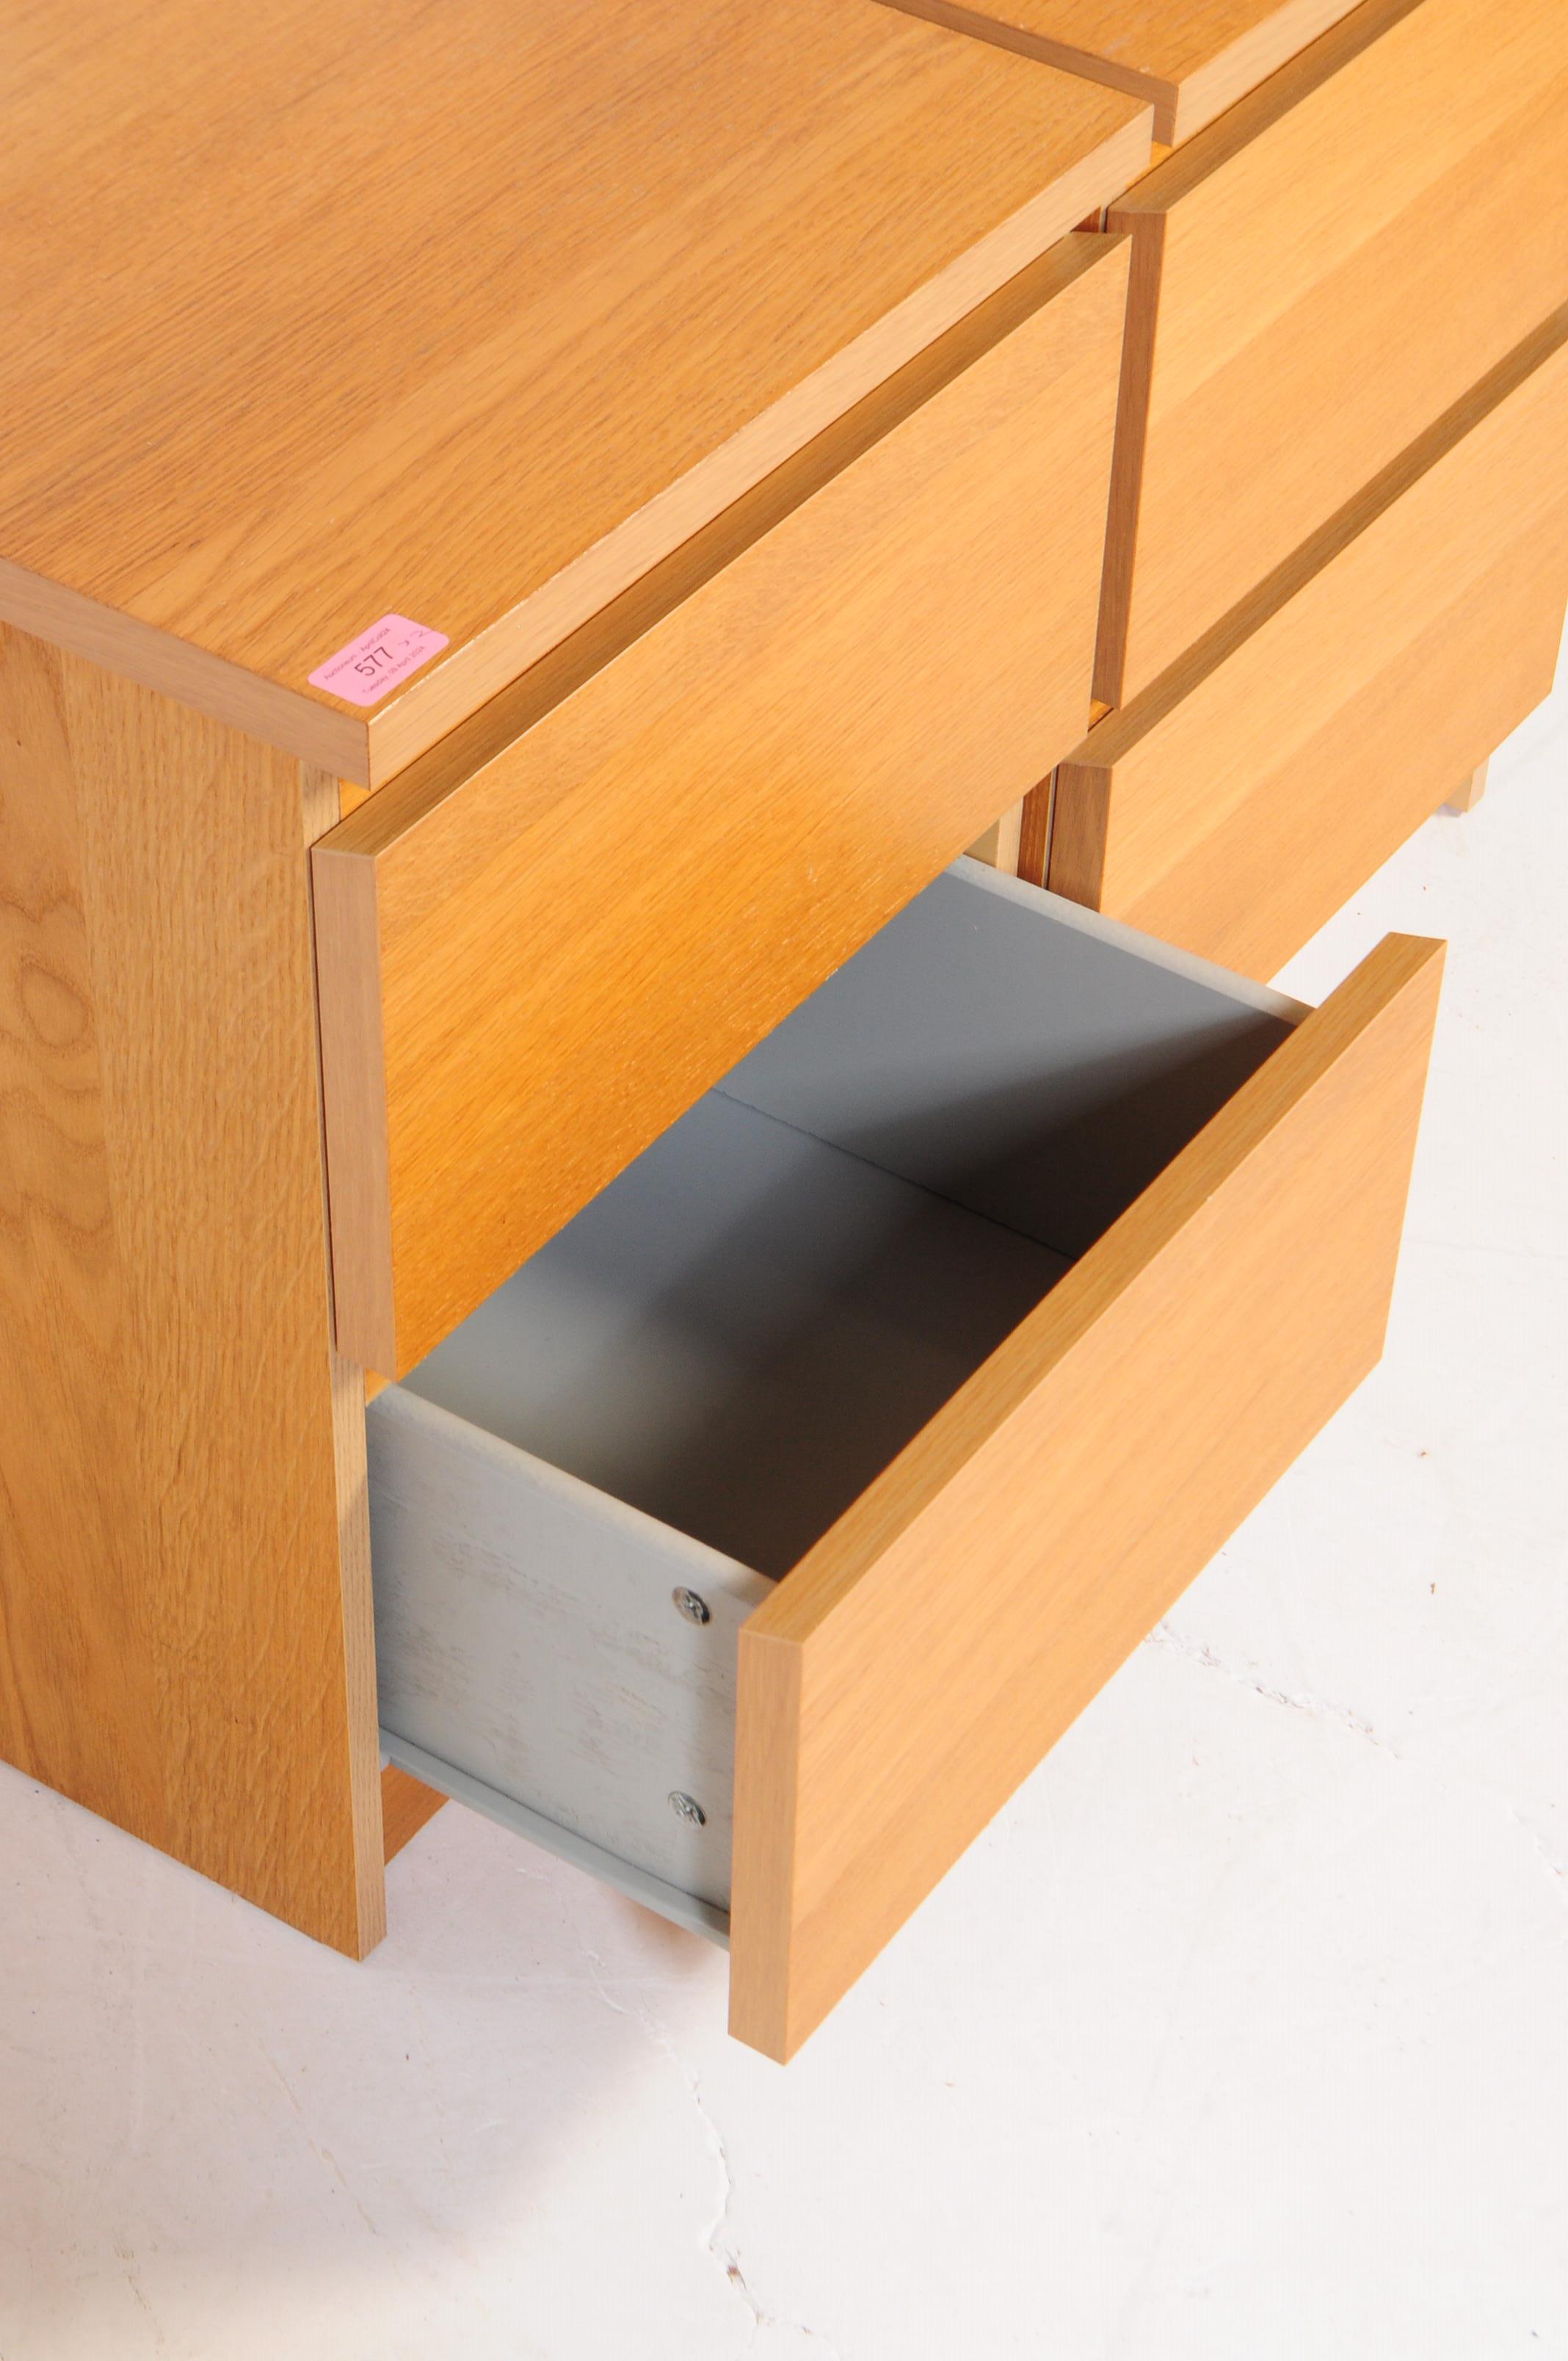 IKEA MALM - PAIR OF 20TH CENTURY BEECH BEDSIDES - Image 5 of 6